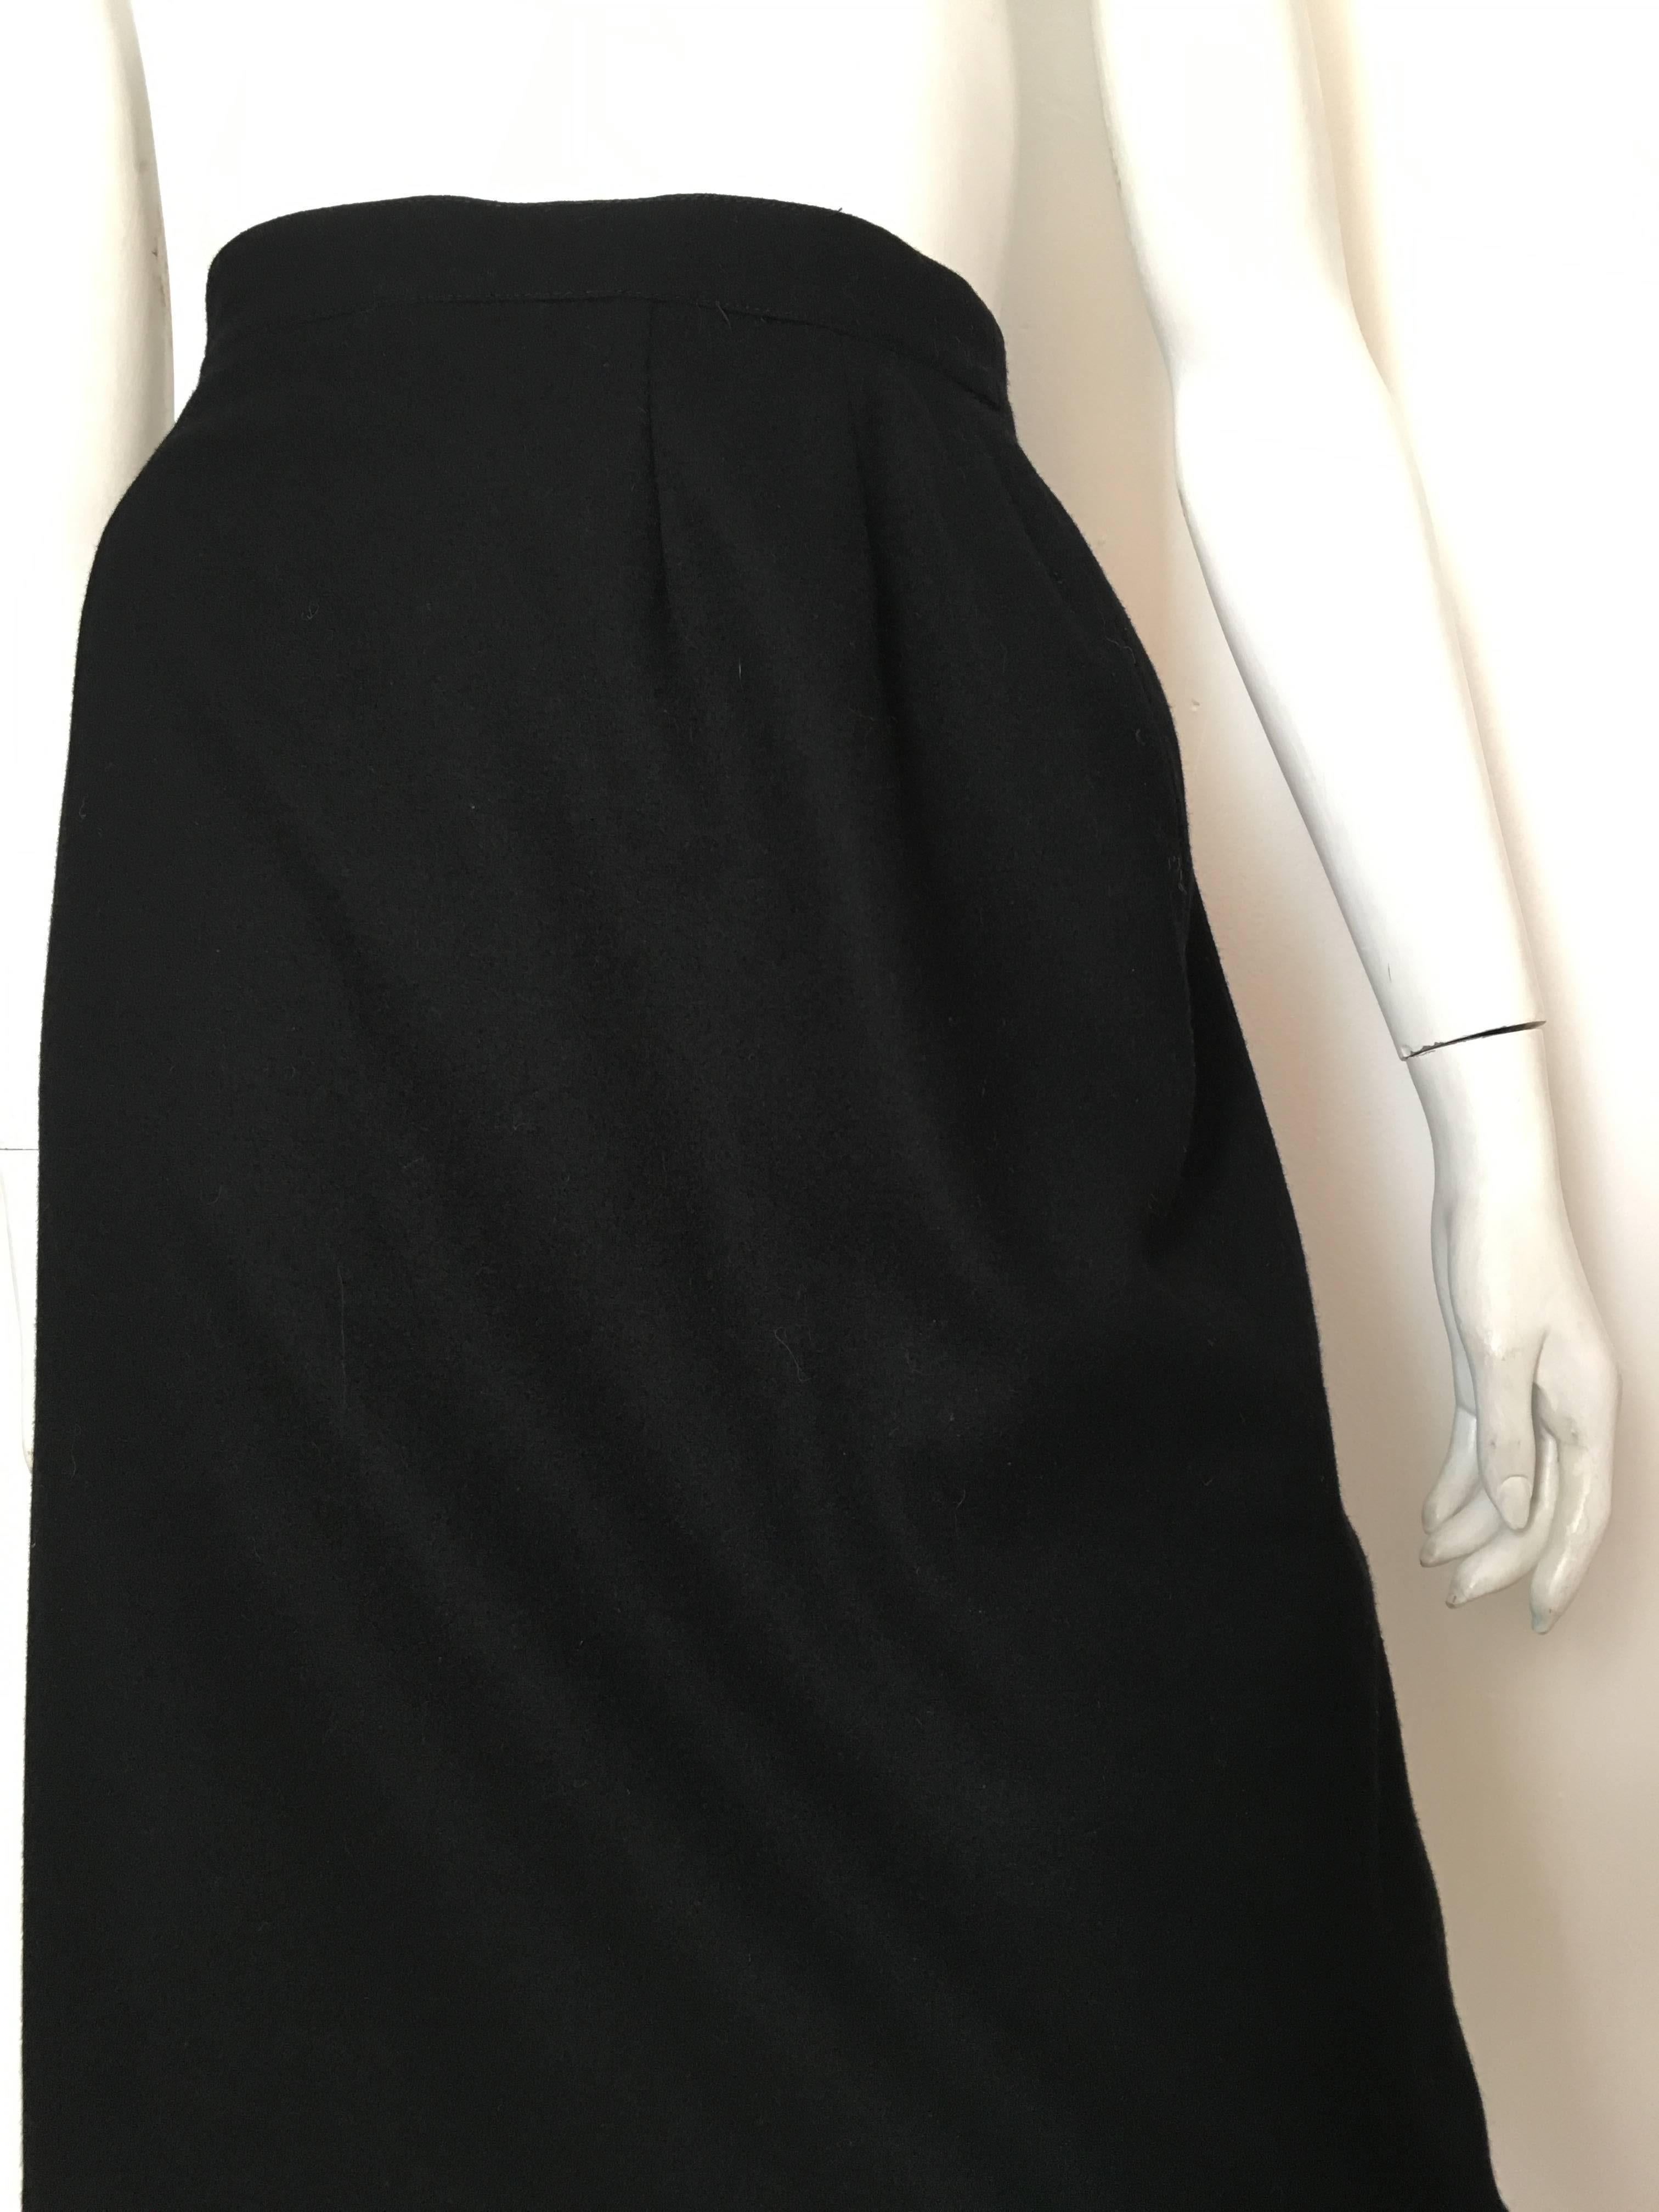 Karl Lagerfeld for Neiman Marcus 1980s black wool cashmere blend pencil skirt is a French size 38 and fits an USA size 6. Ladies please grab your tape measure so you can properly measure your waist, hips and length to see if this vintage treasure